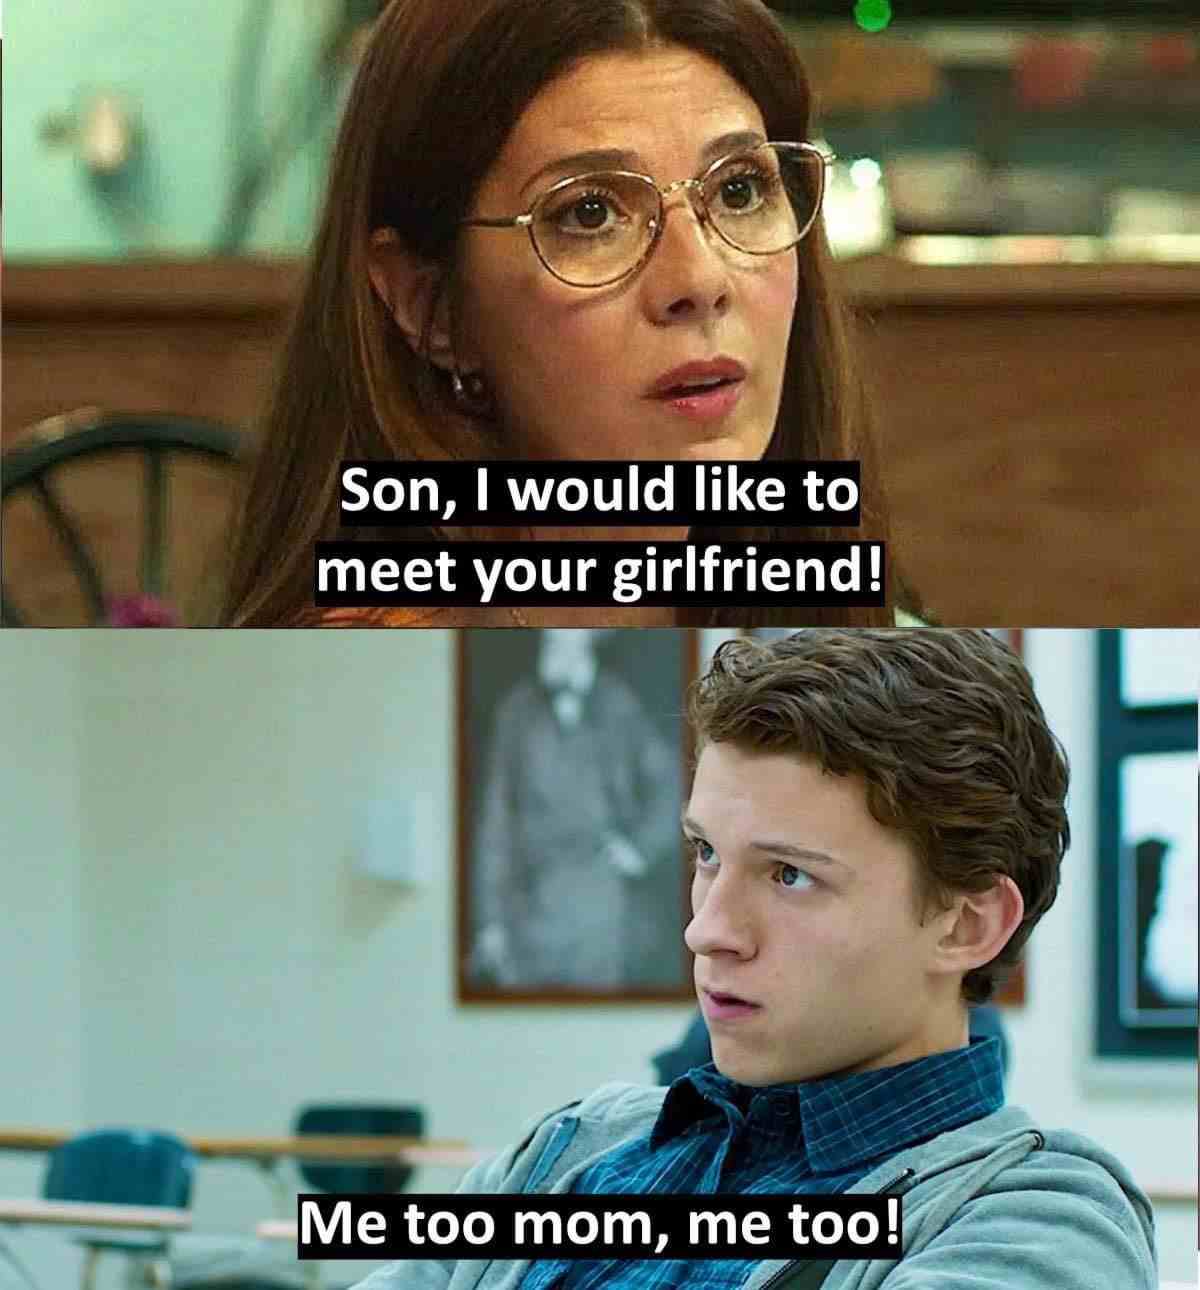 Son, i would like to meet your girlfriend